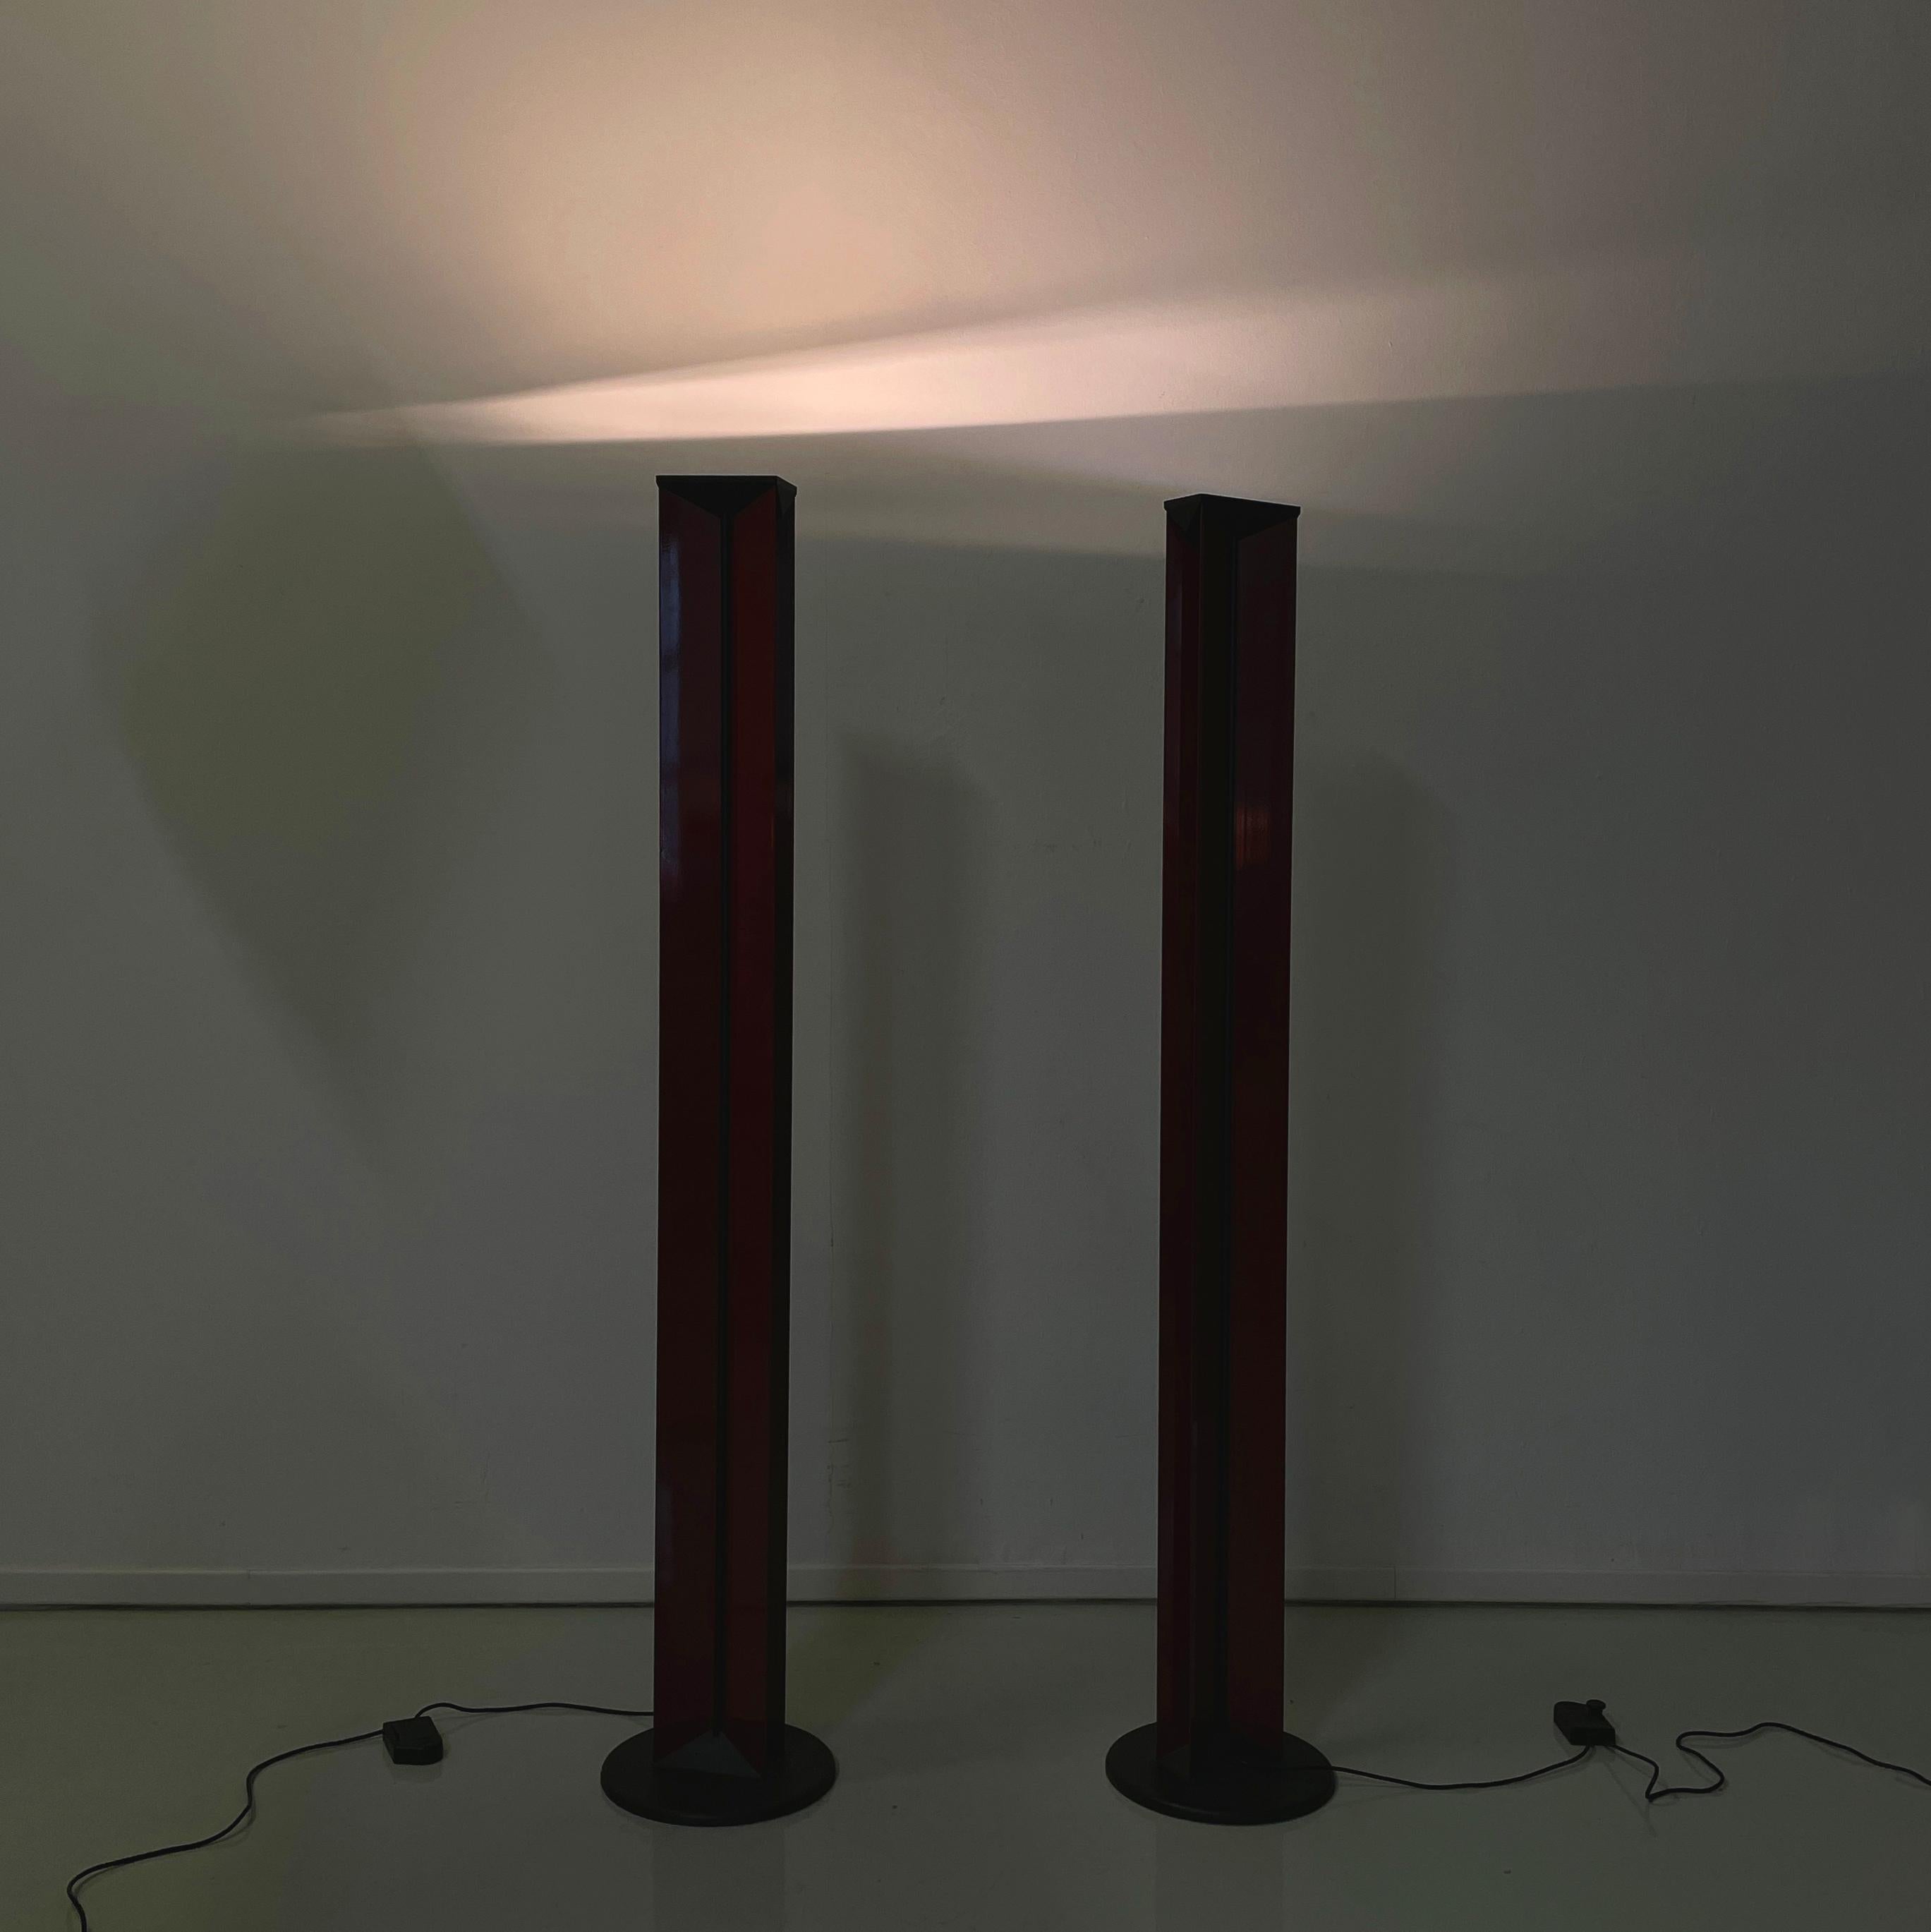 Italian modern Floor lamps in red metal and black plastic by Relco, 1990s
Pair of floor lamps with a structure made of shiny red painted metal sheets, placed in an X shape. In the center of the structure there is a strip of black plastic. In the